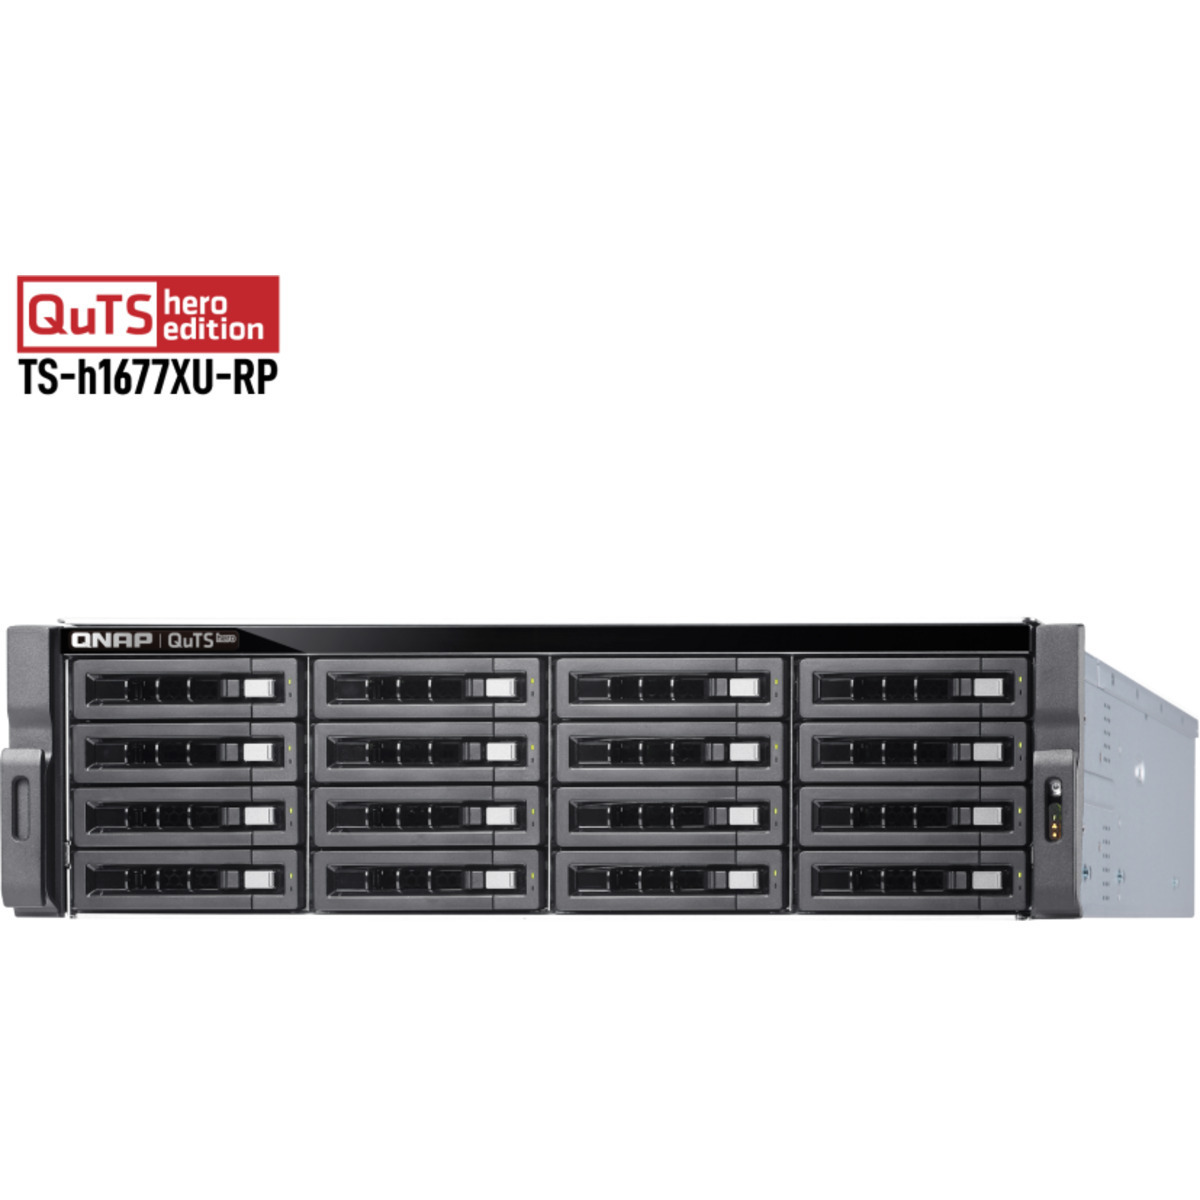 QNAP TS-h1677XU-RP QuTS hero Edition 20tb 16-Bay RackMount Large Business / Enterprise NAS - Network Attached Storage Device 10x2tb Seagate IronWolf Pro ST2000NT001 3.5 7200rpm SATA 6Gb/s HDD NAS Class Drives Installed - Burn-In Tested TS-h1677XU-RP QuTS hero Edition